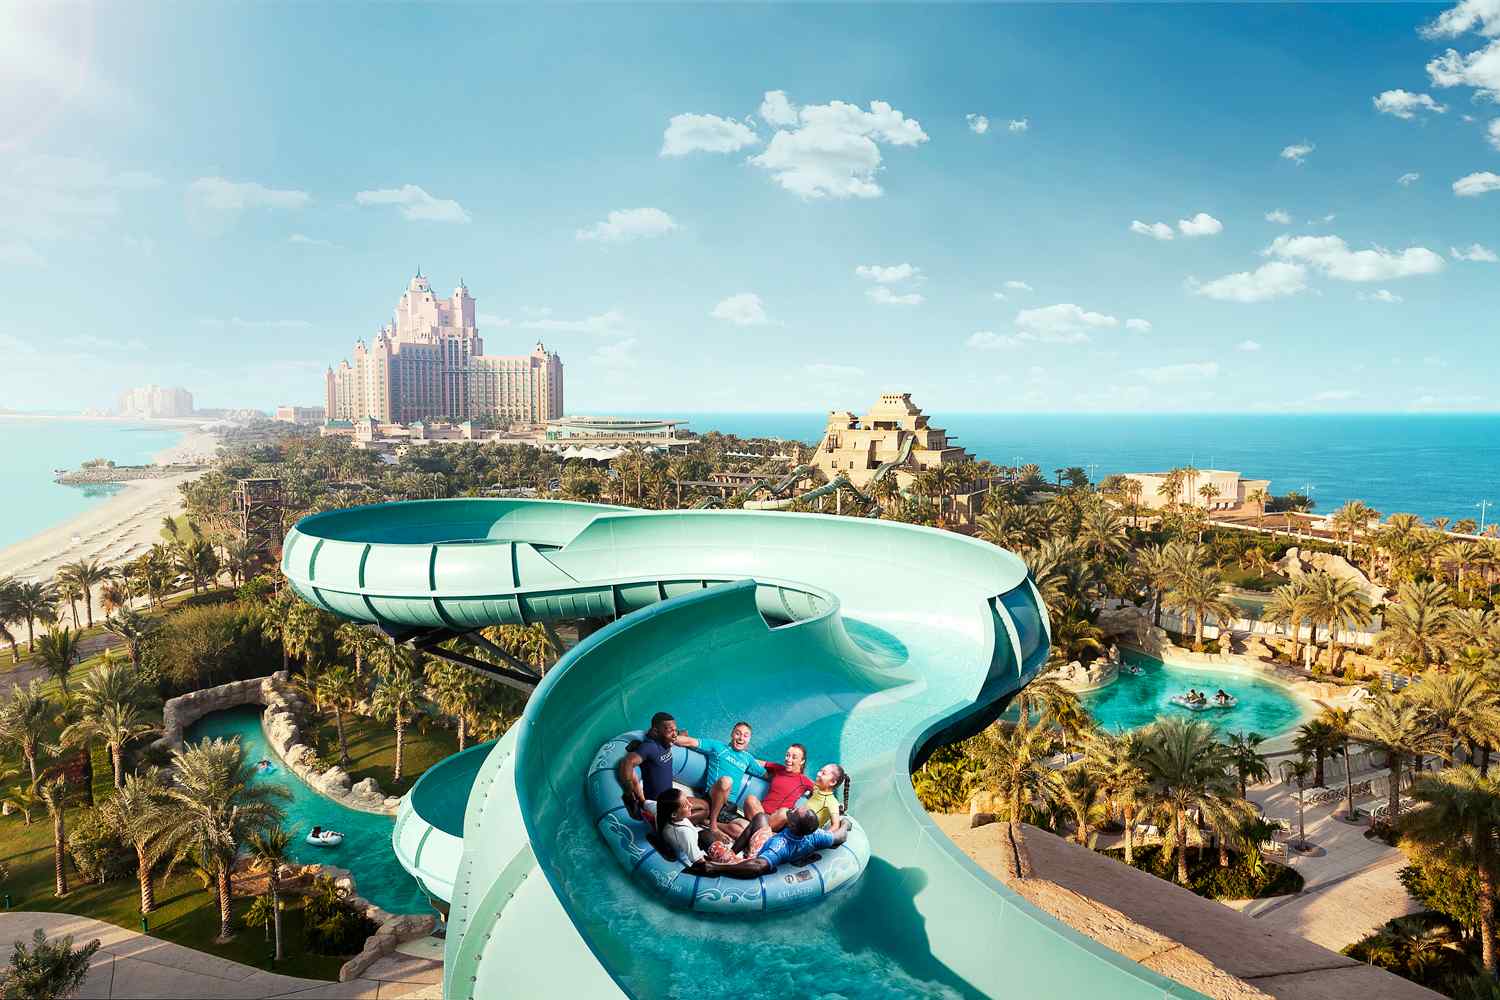 Embark on the thrilling Burj Surj, a tube ride for two to five people, spinning through enormous bowls and twisting slides.